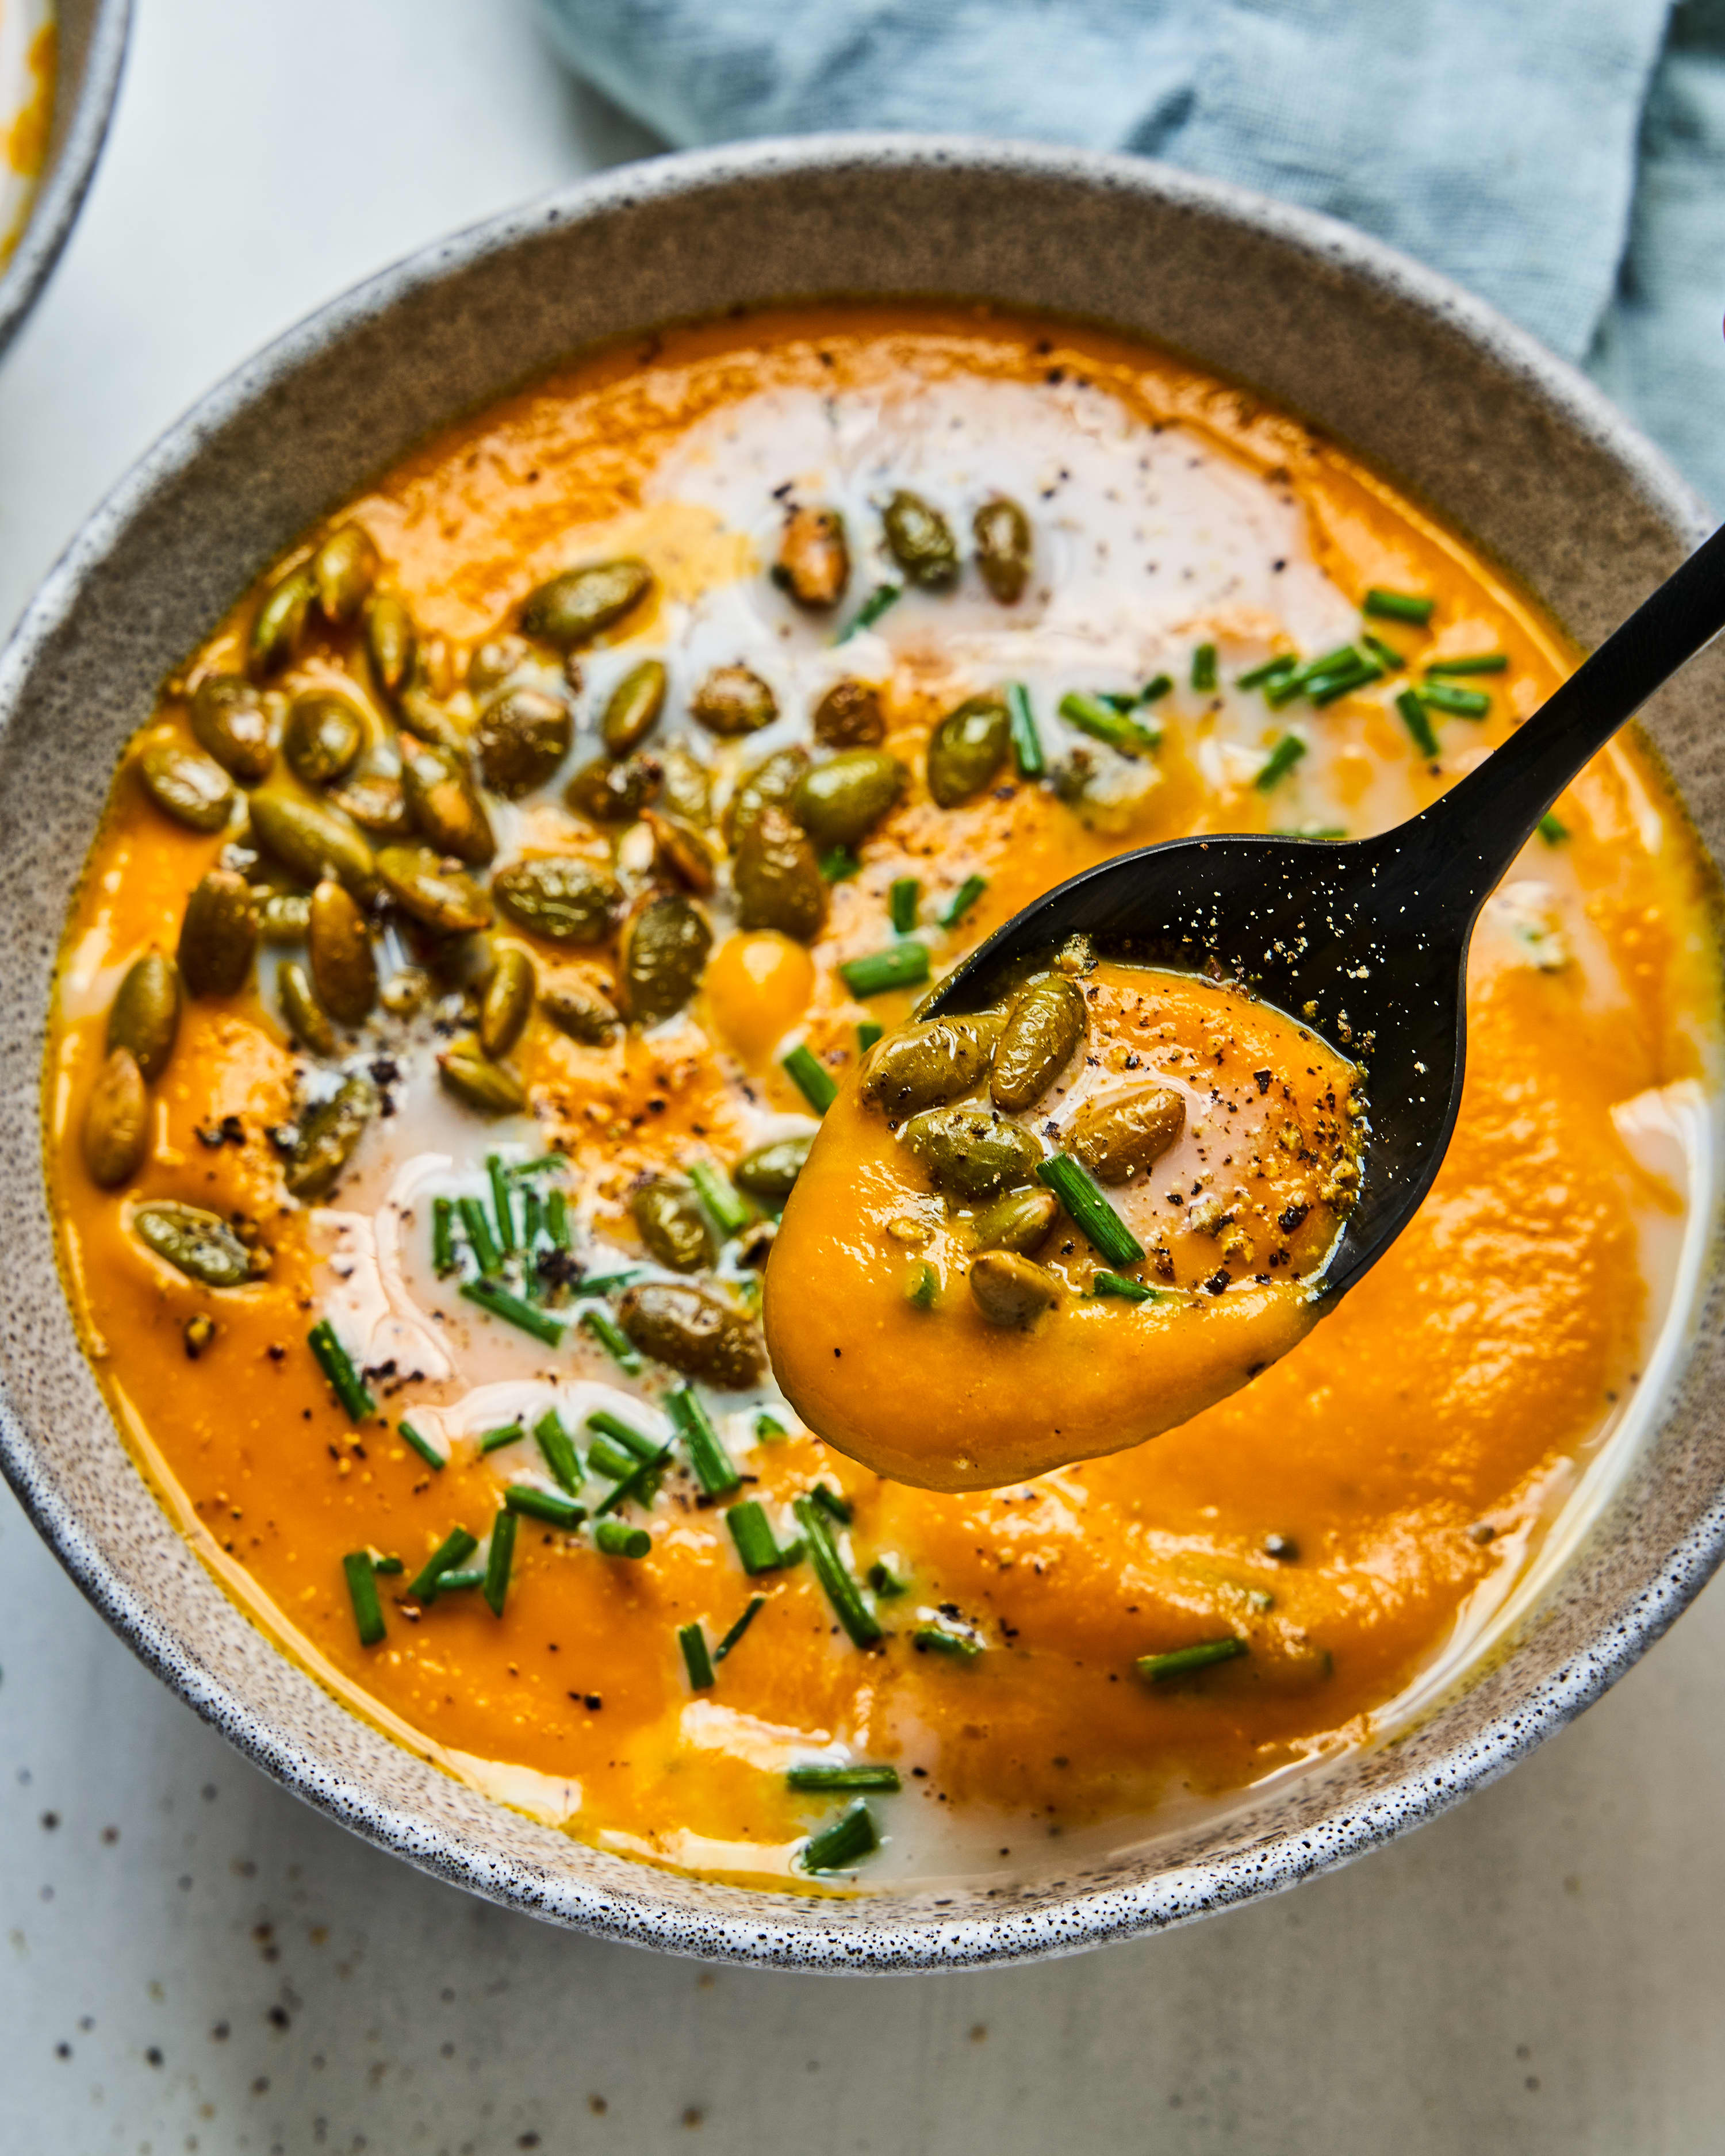 Carrot Ginger Soup - The Forked Spoon